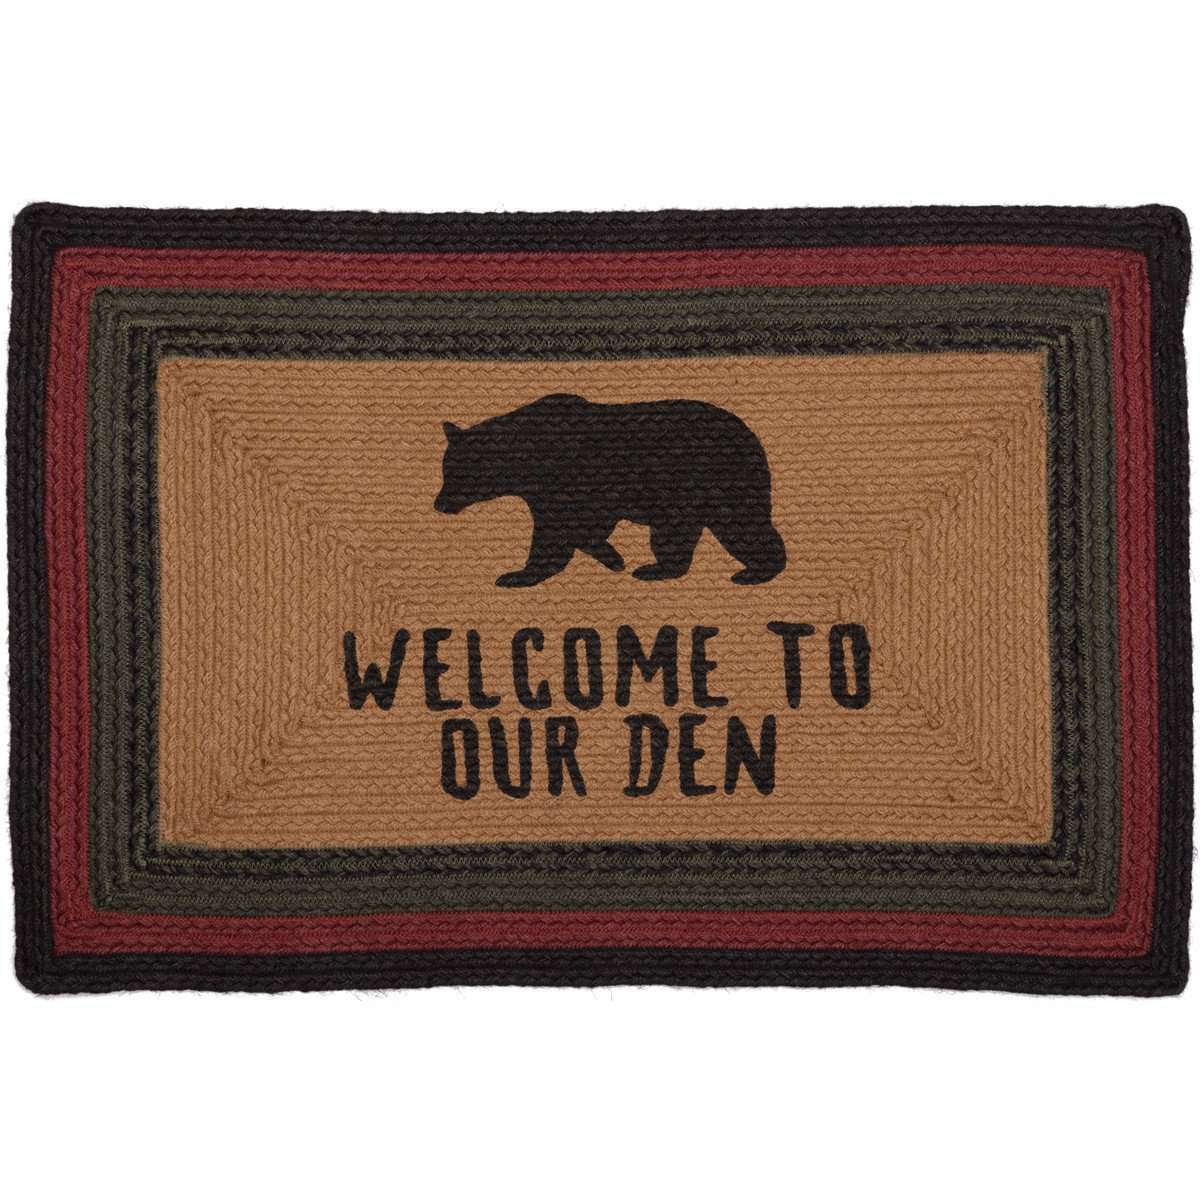 Wyatt Stenciled Bear Jute Braided Rug Oval/Rect rugs VHC Brands 20x30 Rect Welcome to our Den 